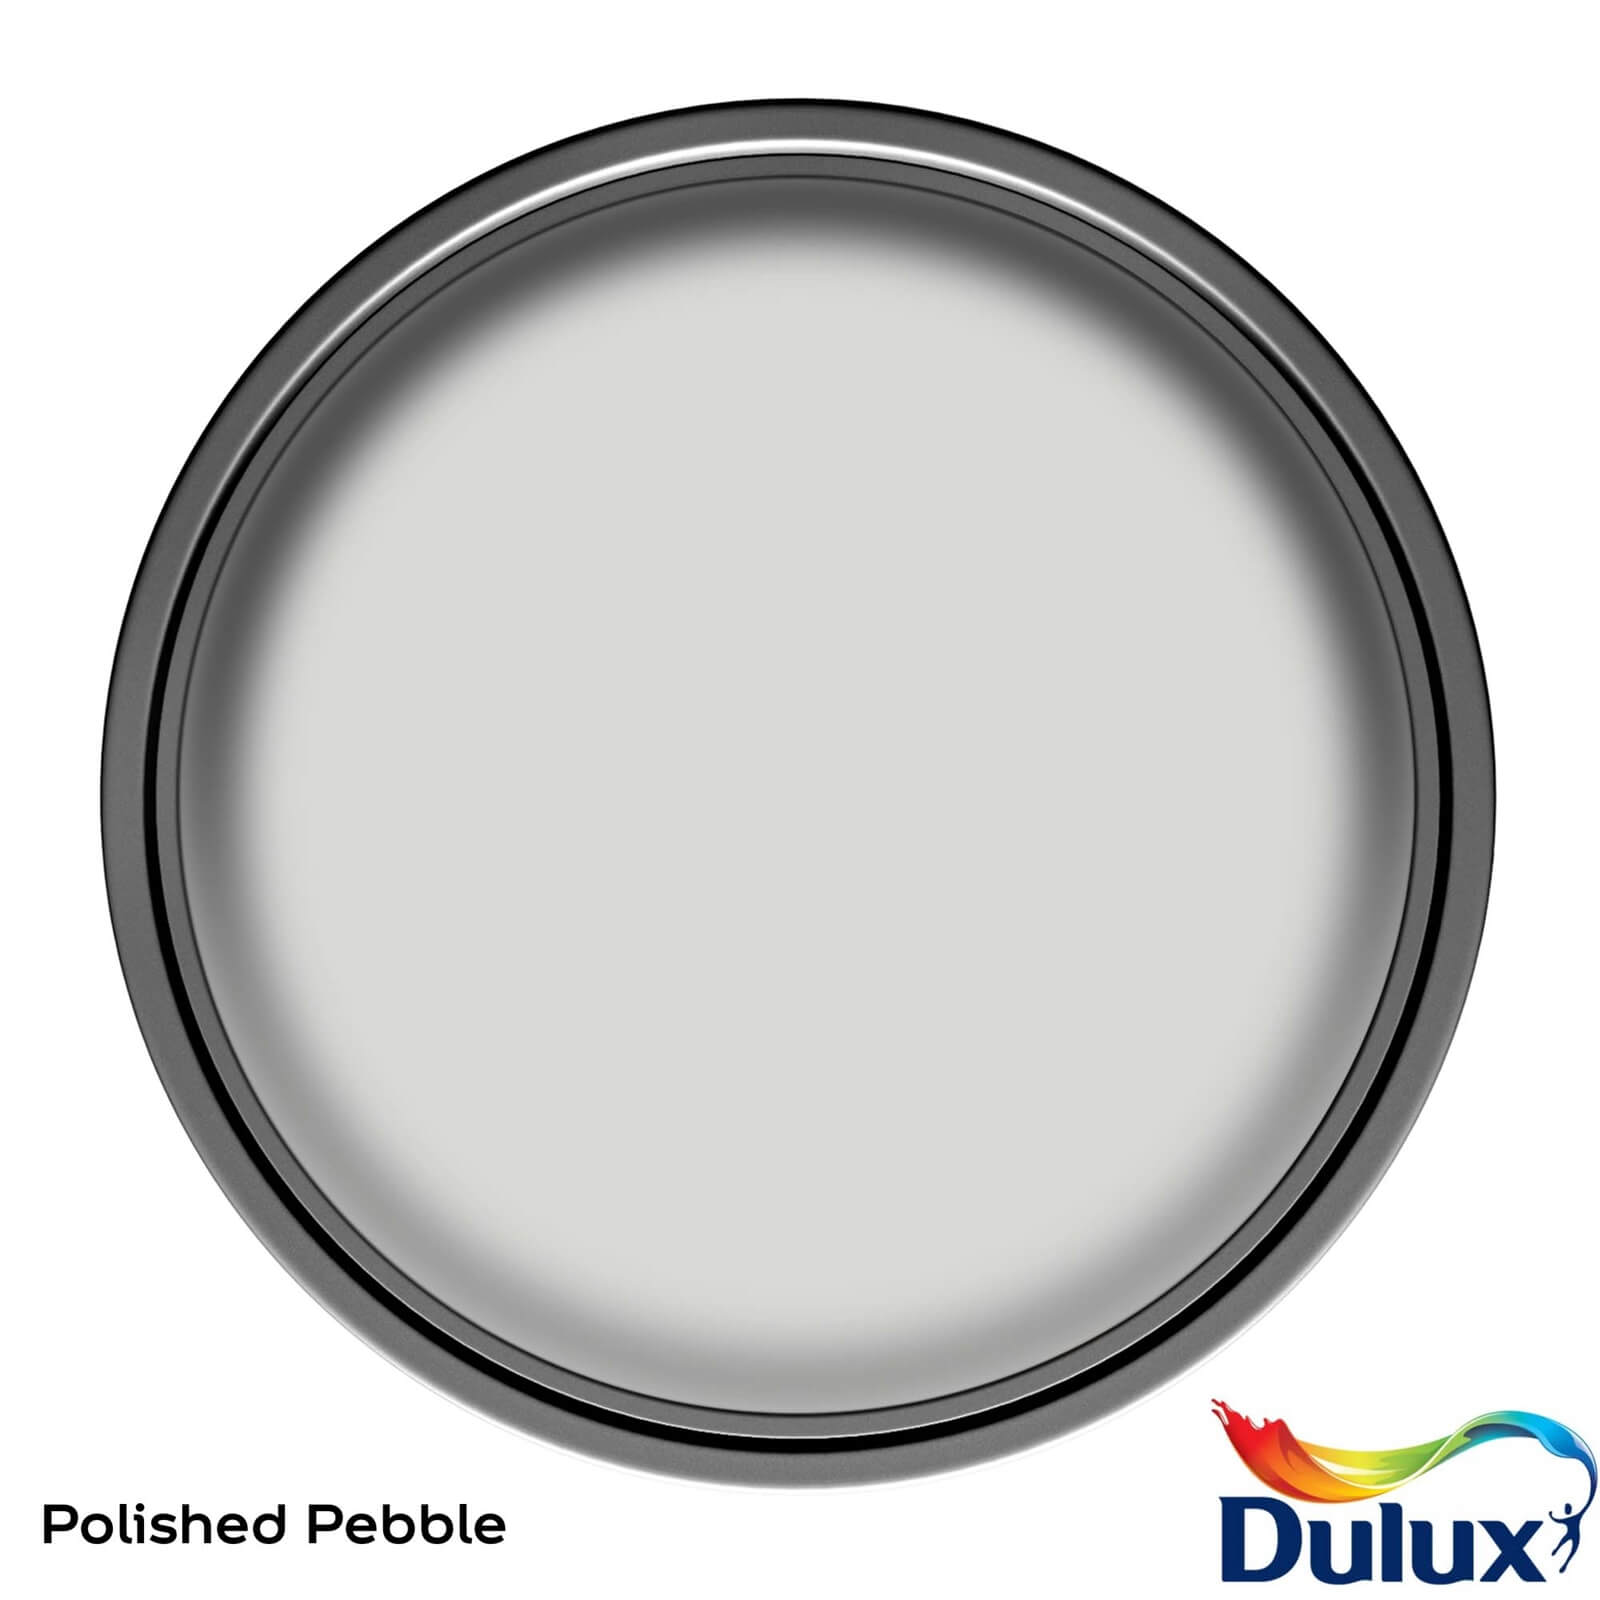 Dulux Quick Dry Gloss Paint Polished Pebble - 750ml